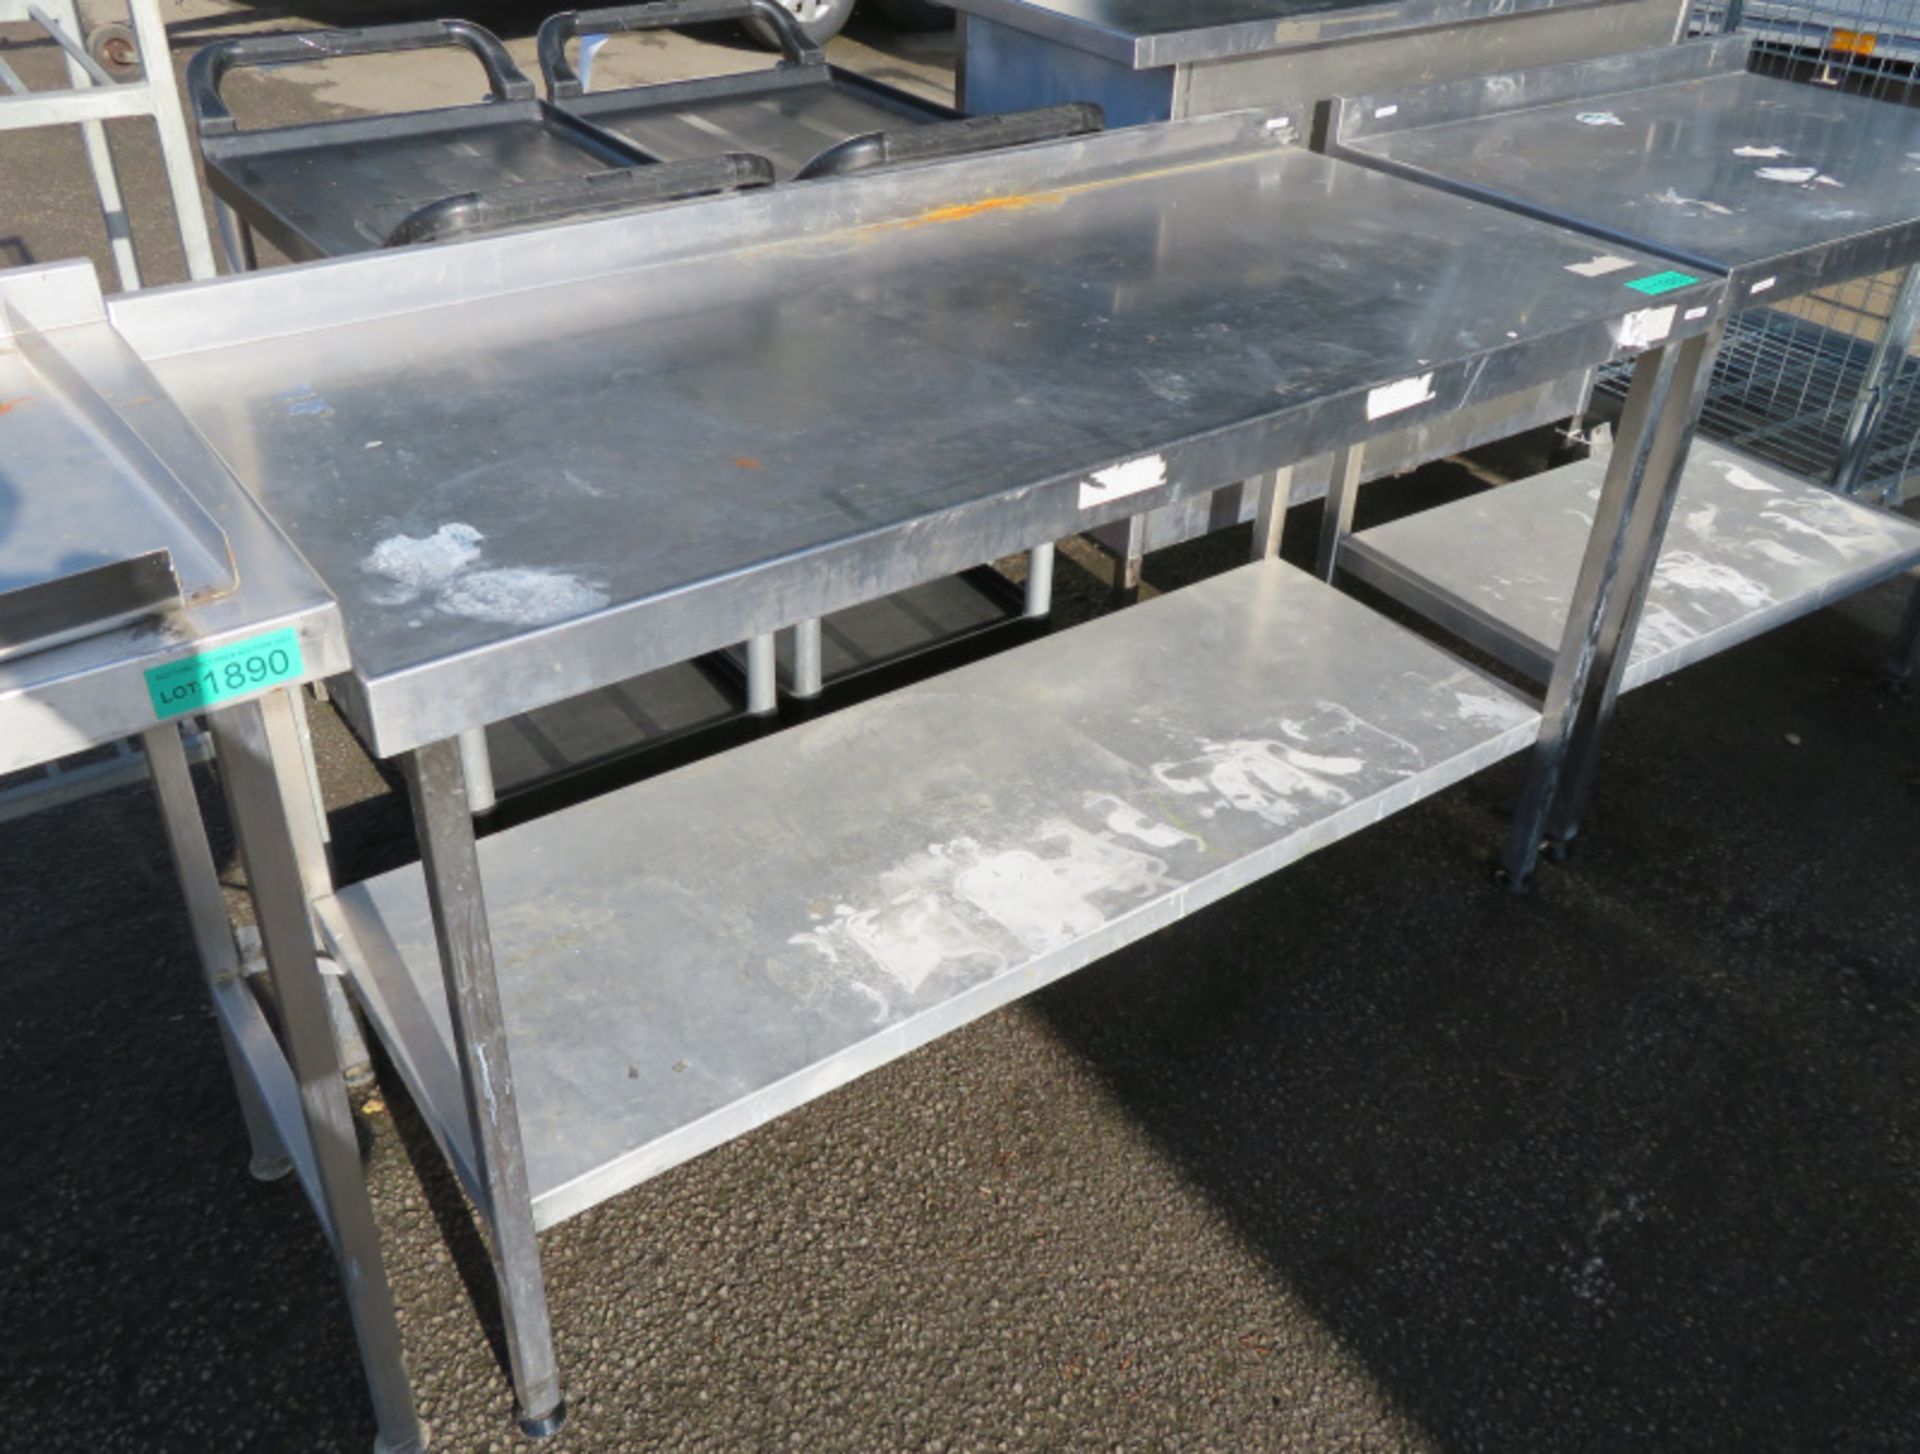 Stainless Steel Table - L1530 x W670 x H920mm - Image 2 of 2